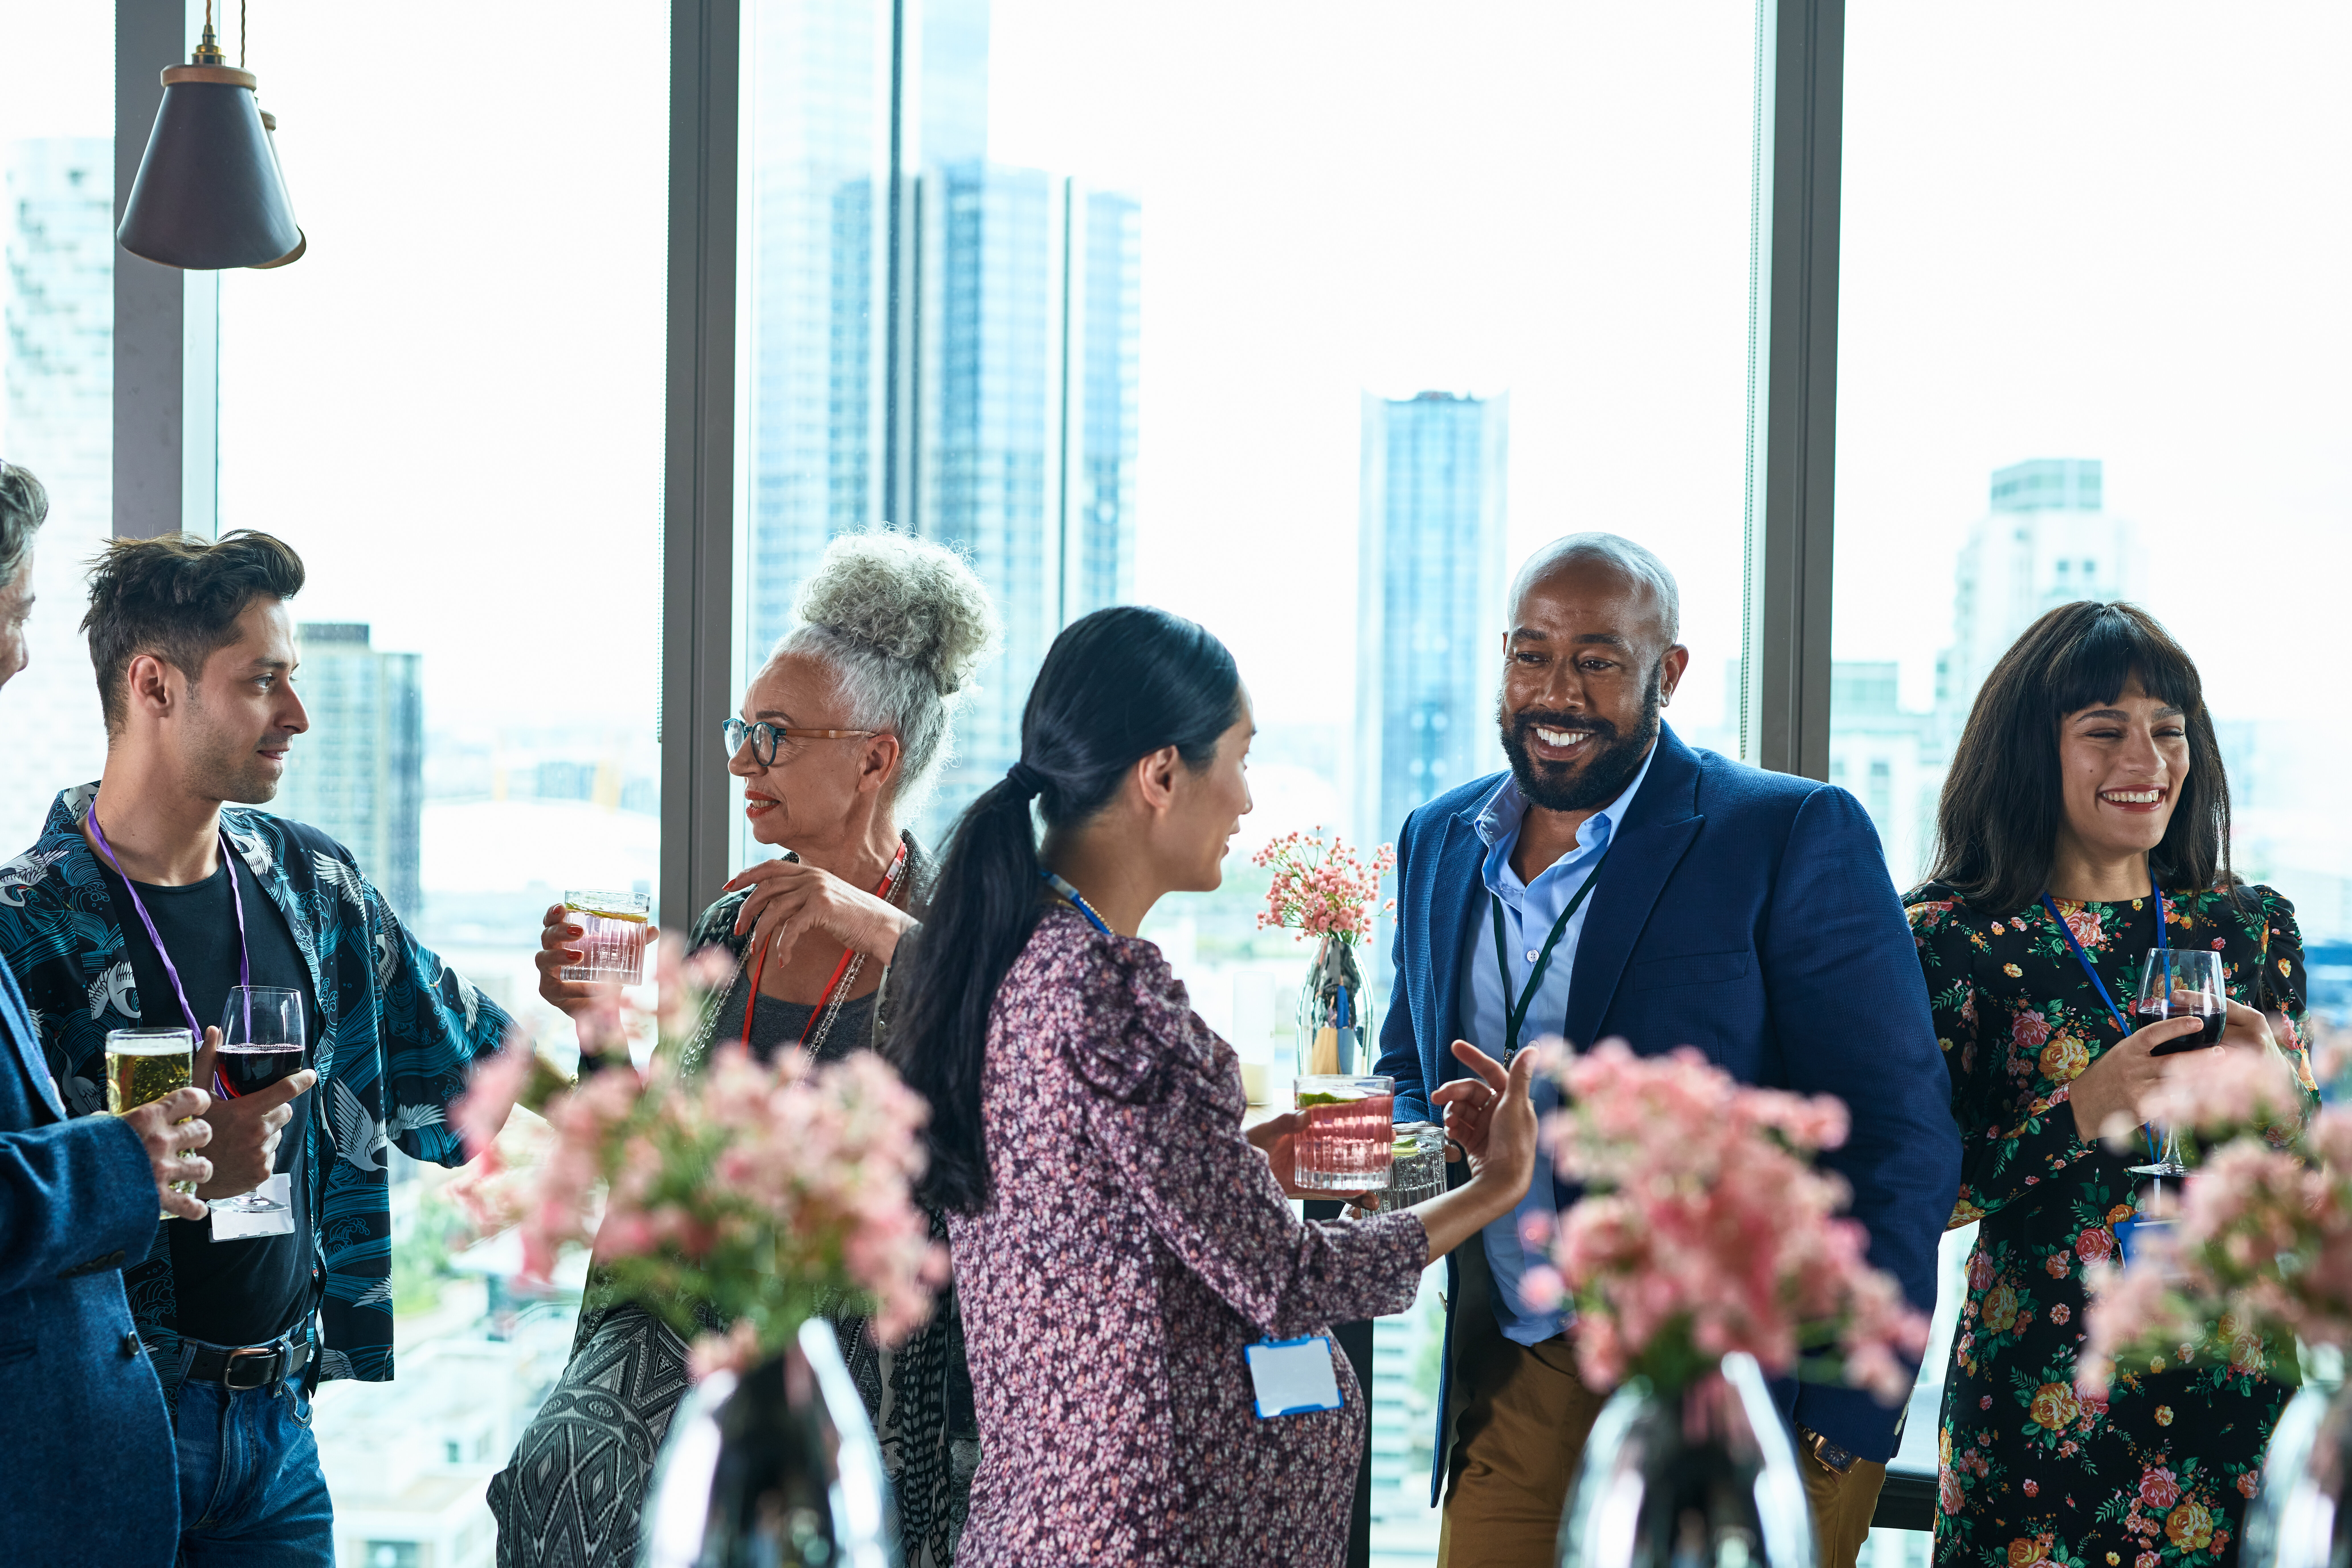 Professionals networking at an indoor event with cityscape in the background